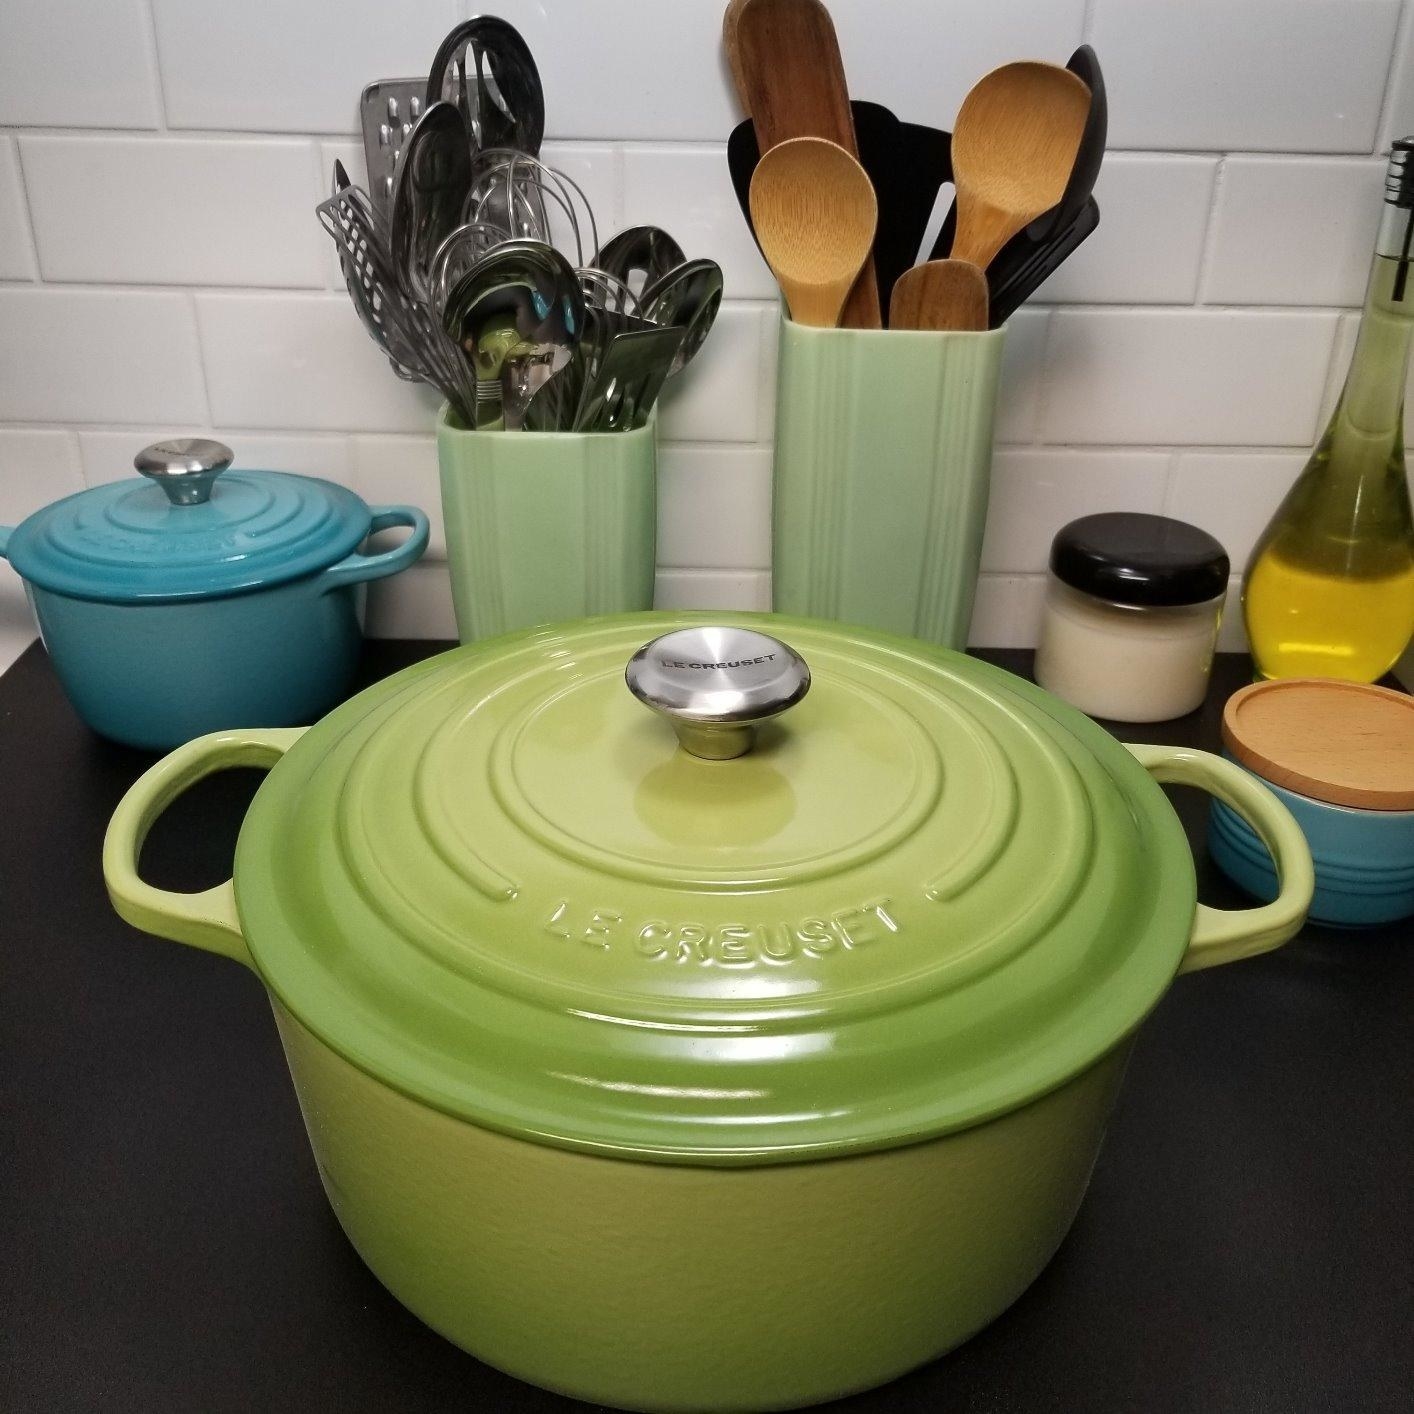 A lime green colored Dutch oven with its lid on sitting on a countertop 